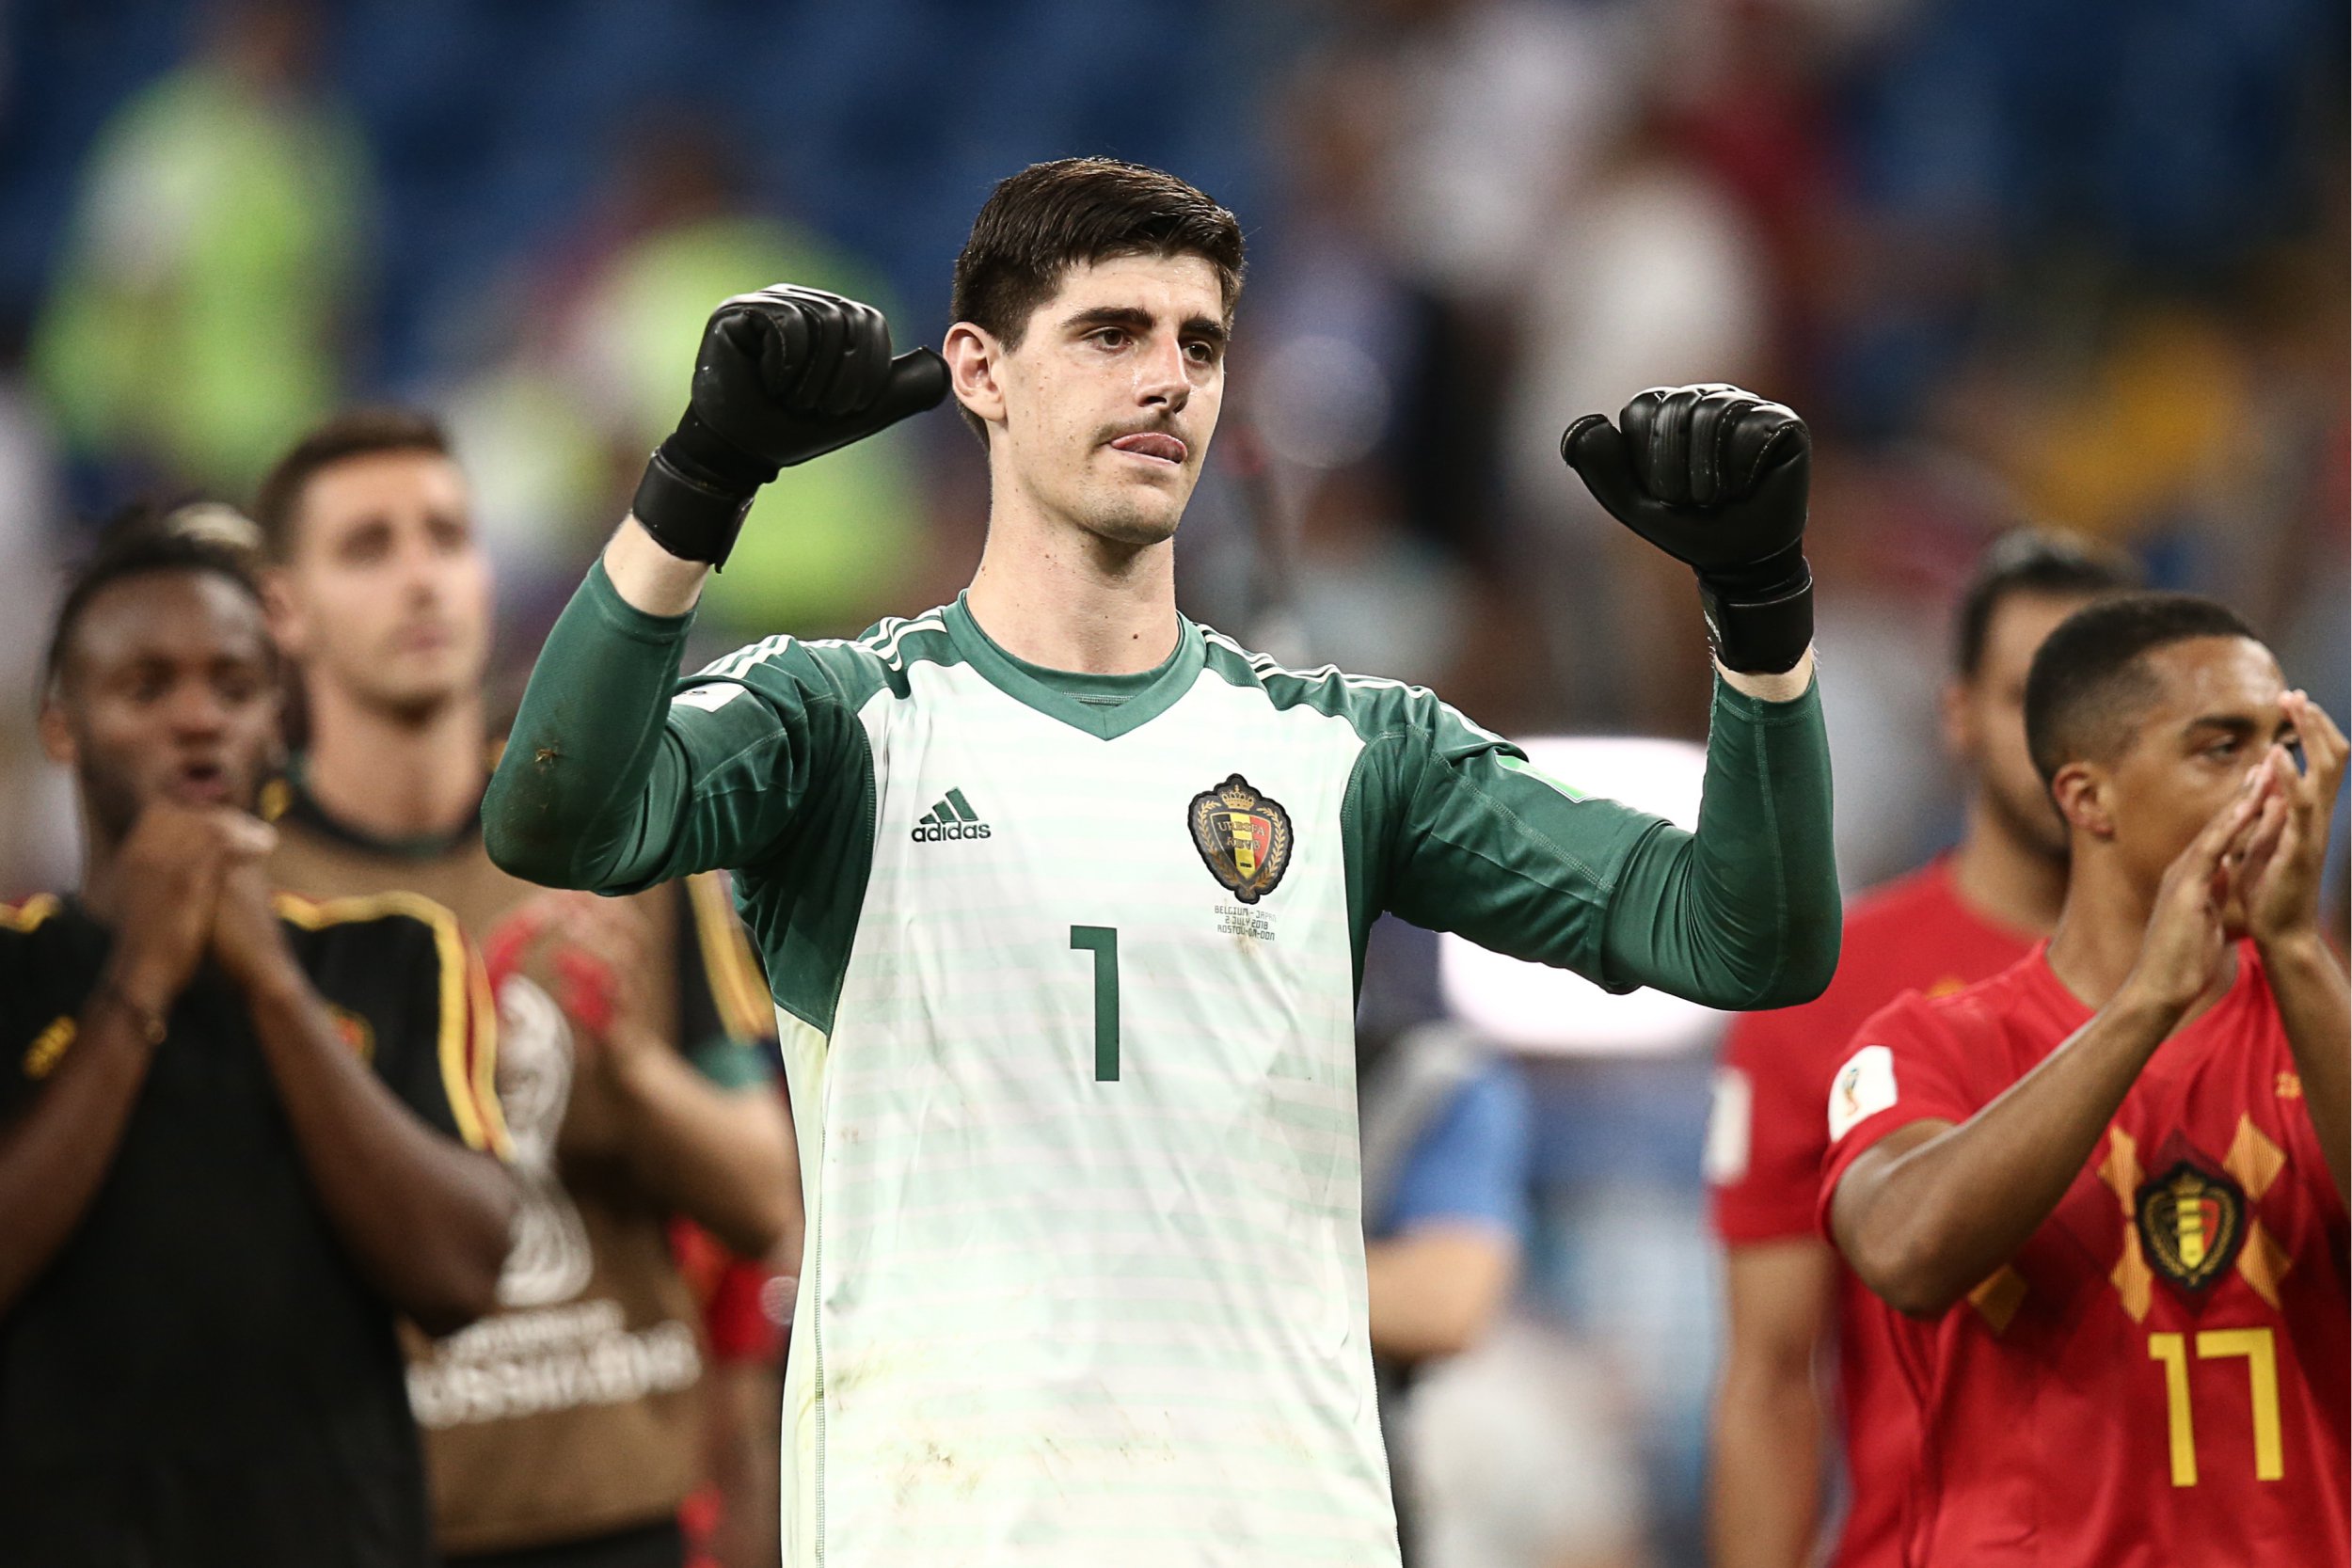 Chelsea goalkeeper Thibaut Courtois speaks out on Real Madrid transfer link after Belgium beat Japan